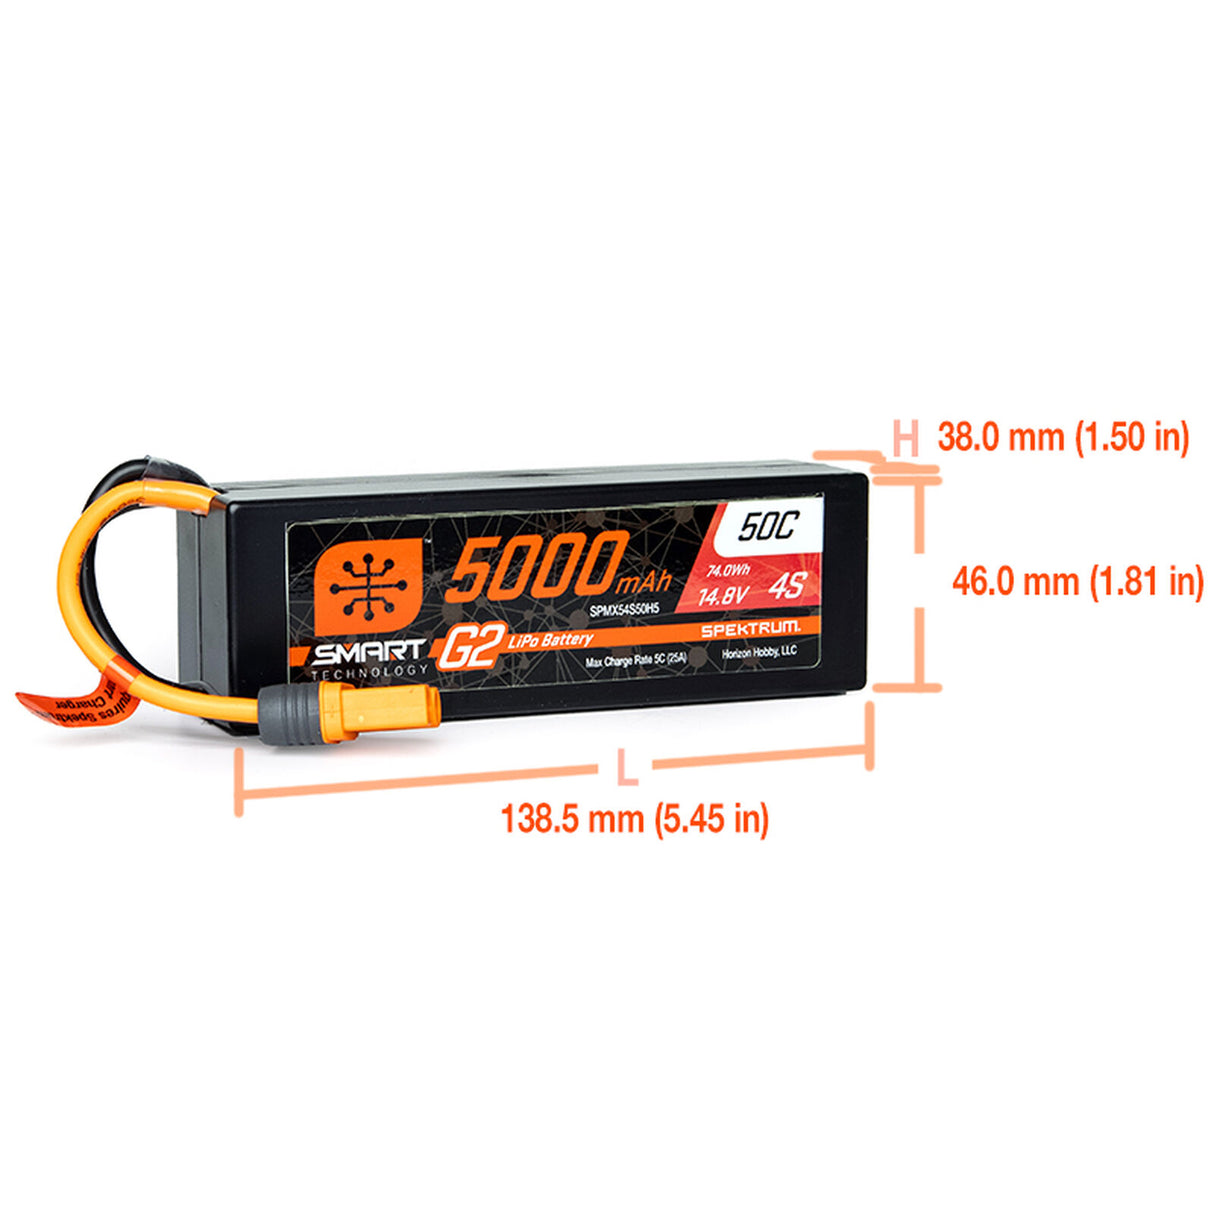 Spektrum 5000mAh 4S 14.8V 50C Smart G2 Hard Case LiPo Battery with IC5 Connector, featuring an orange and black color scheme, dimensions, and product specifications.